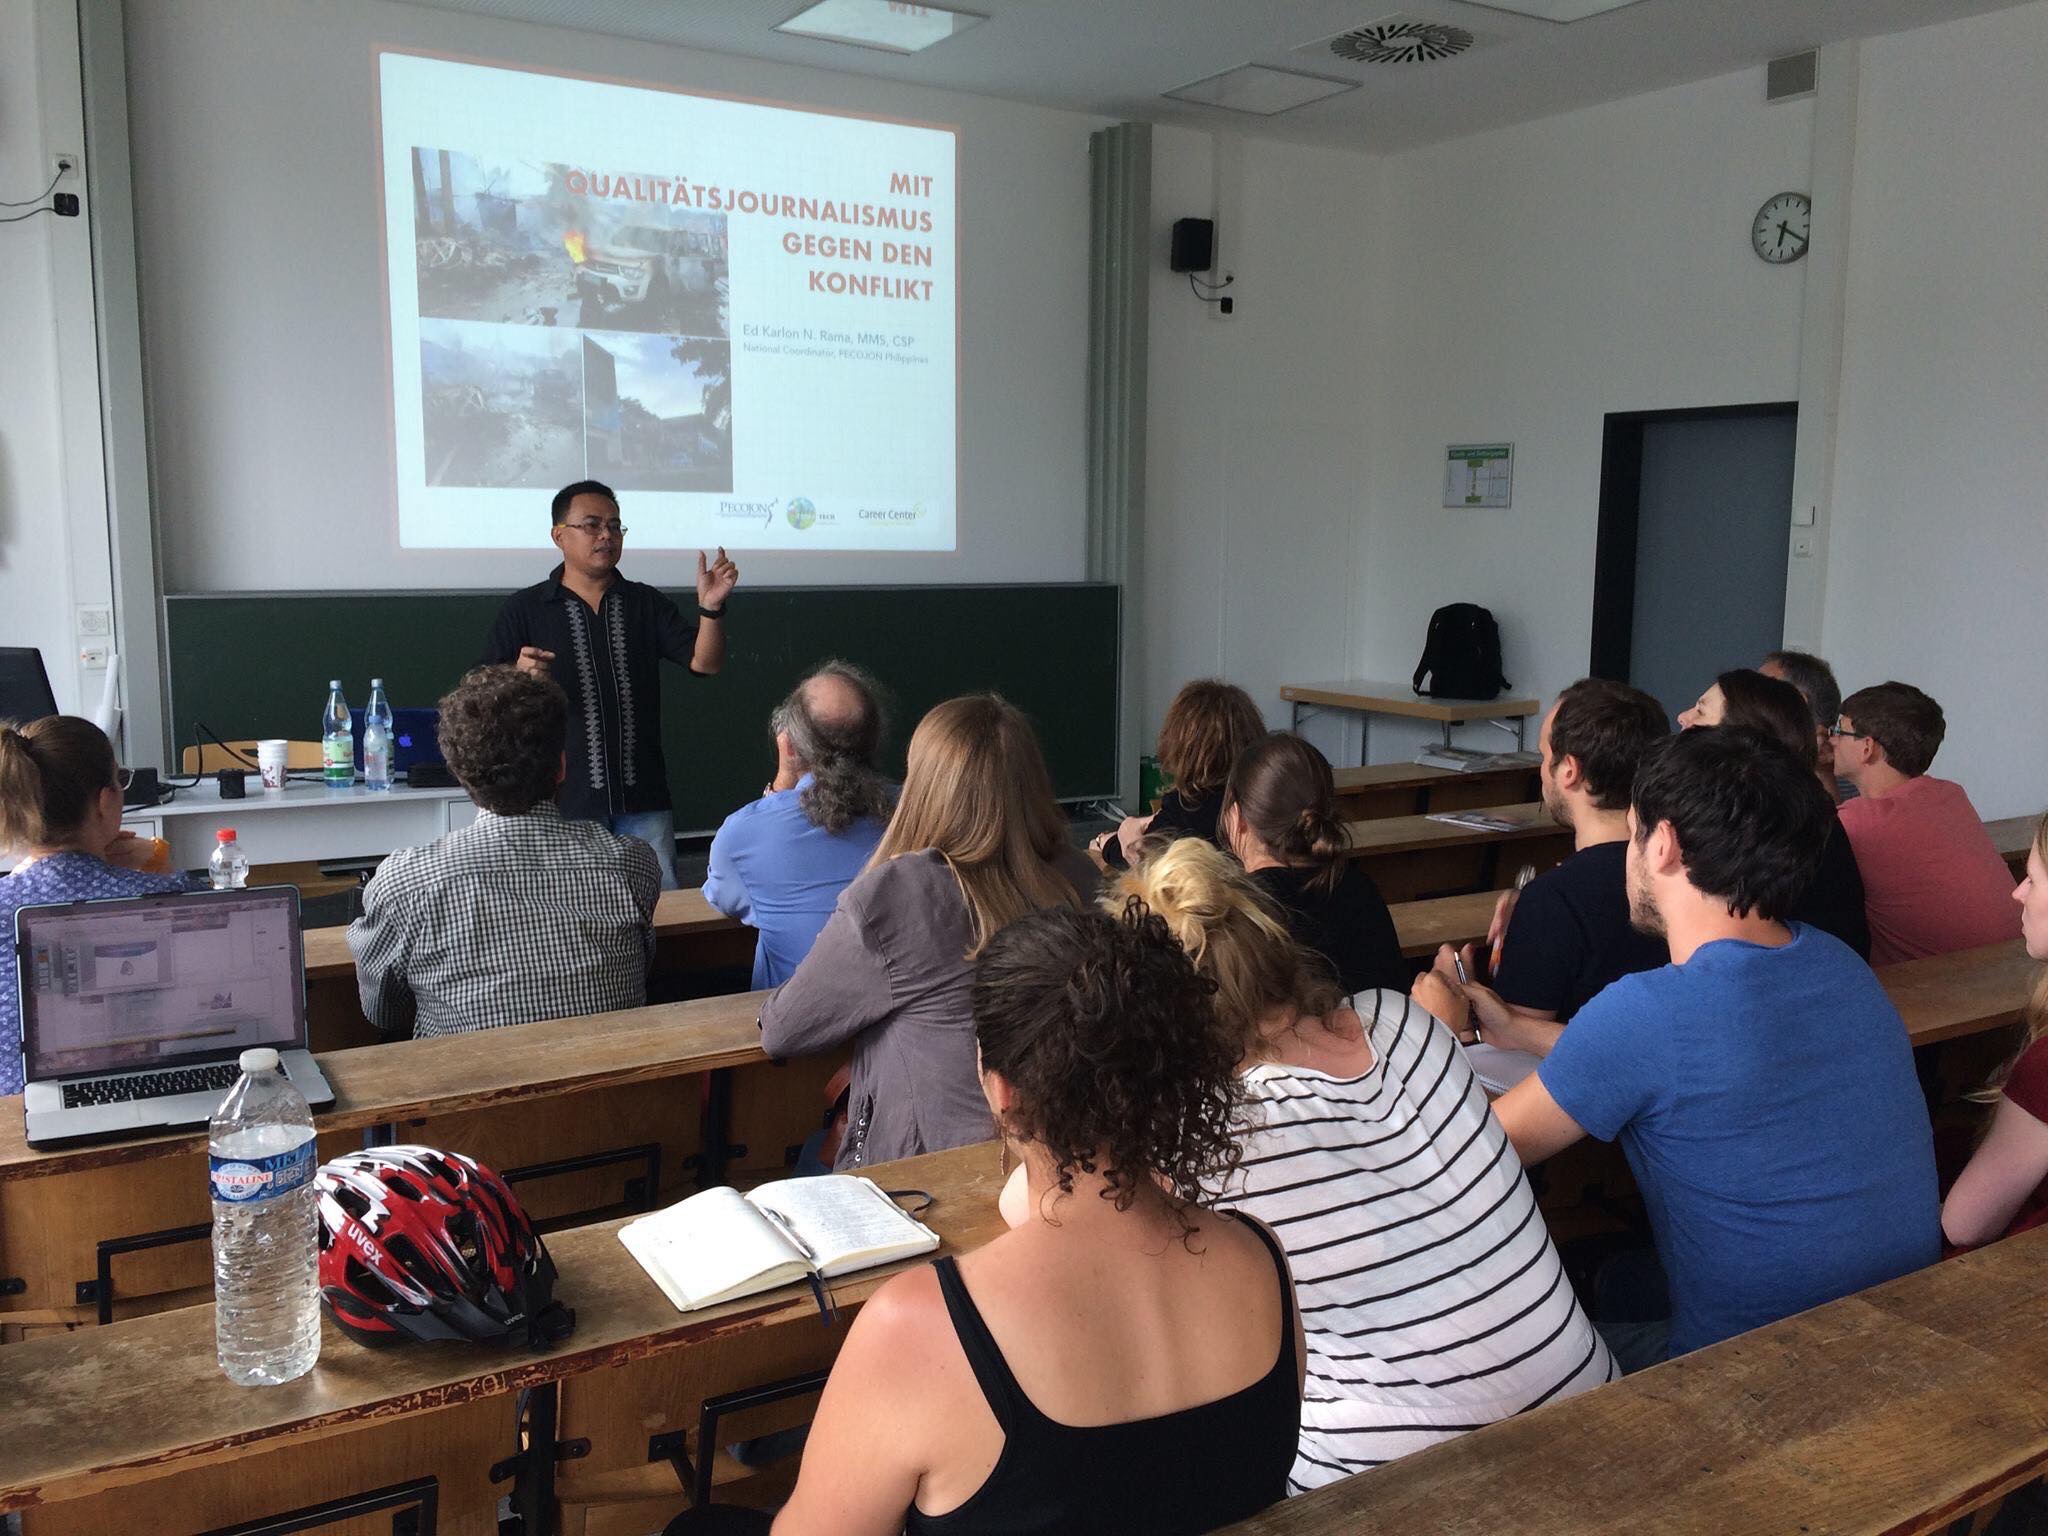 A July 2017 lecture on Conflict-Sensitive Journalism at the Graduate School of Peace and Conflict Studies of the University of Marburg, in Germany.